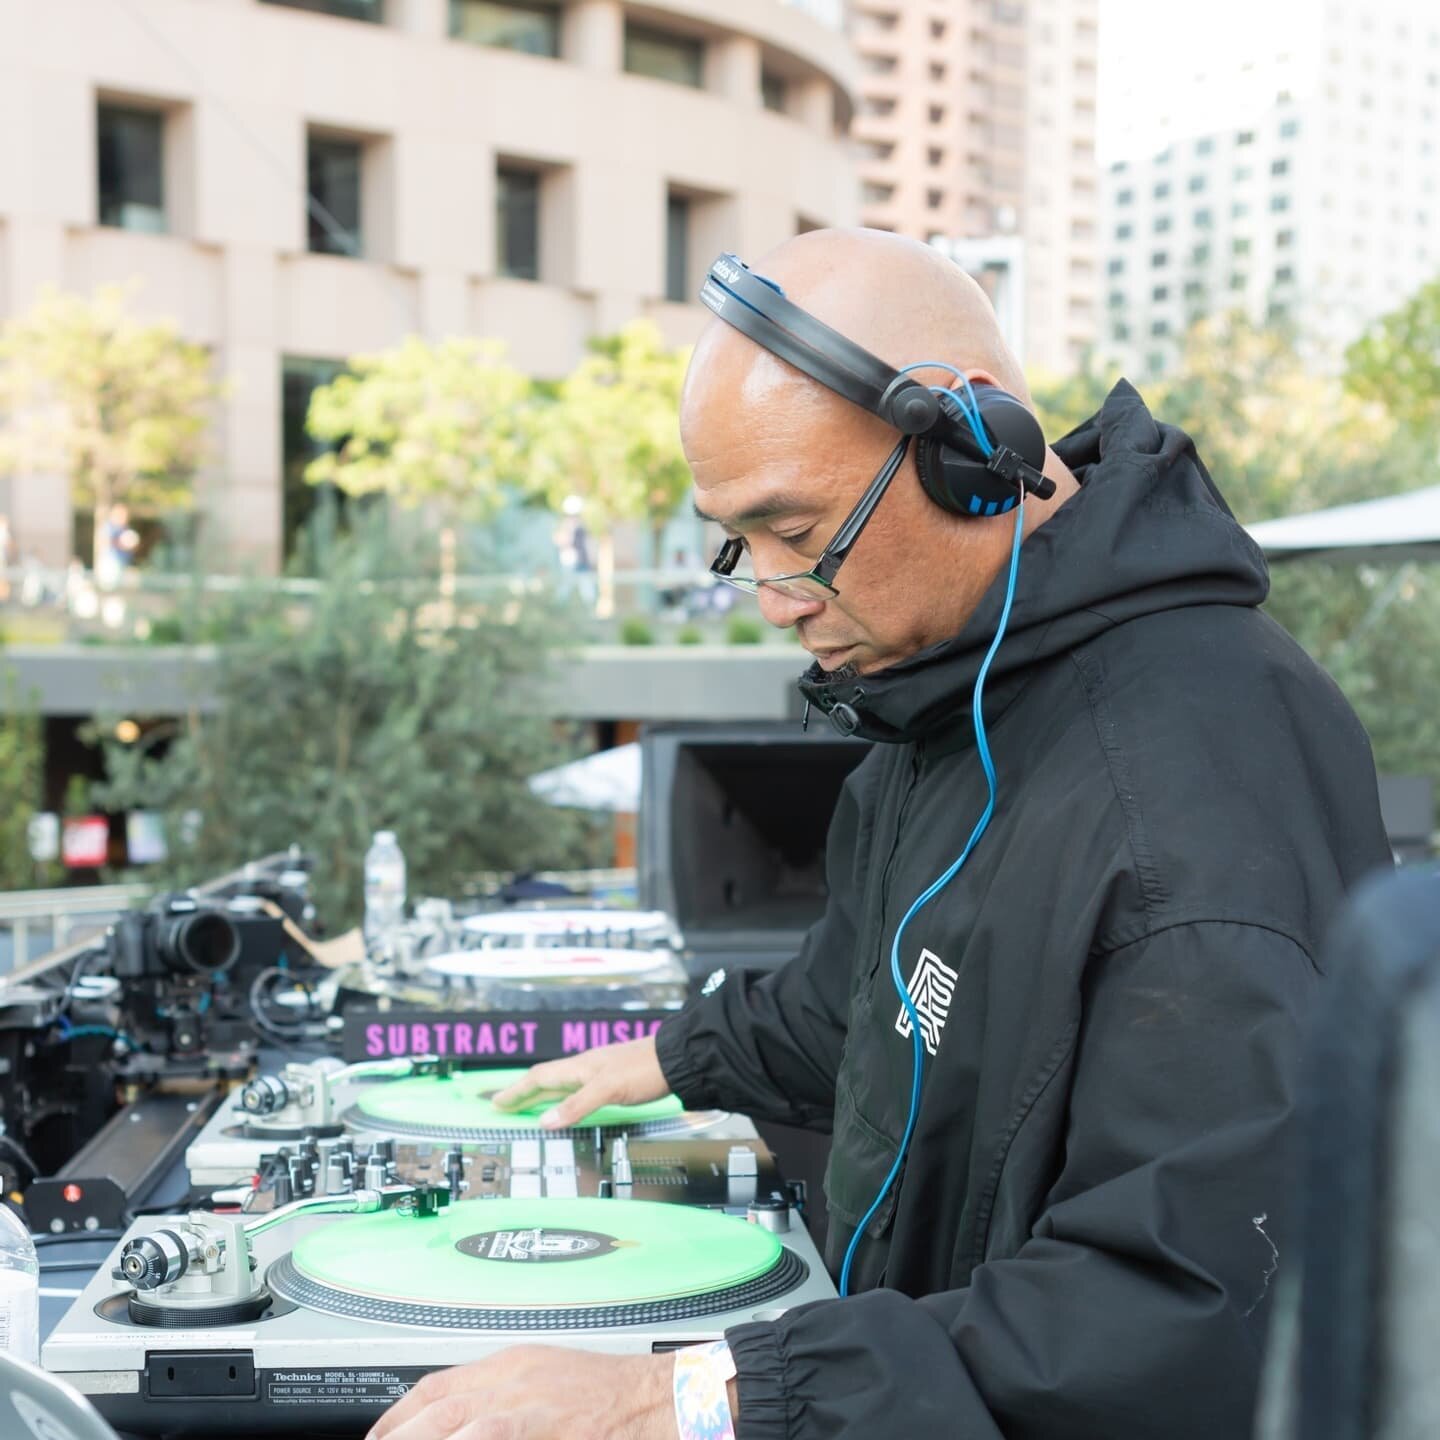 We gotta show love to longtime #GPCommunity member @rhettmatic!  As a member of the World Famous @beatjunkies, he rocked the crowd at Grand Performances' presentation of Dilla Fest on August 7th, 2021.  The free outdoor event commemorated 15 Years of